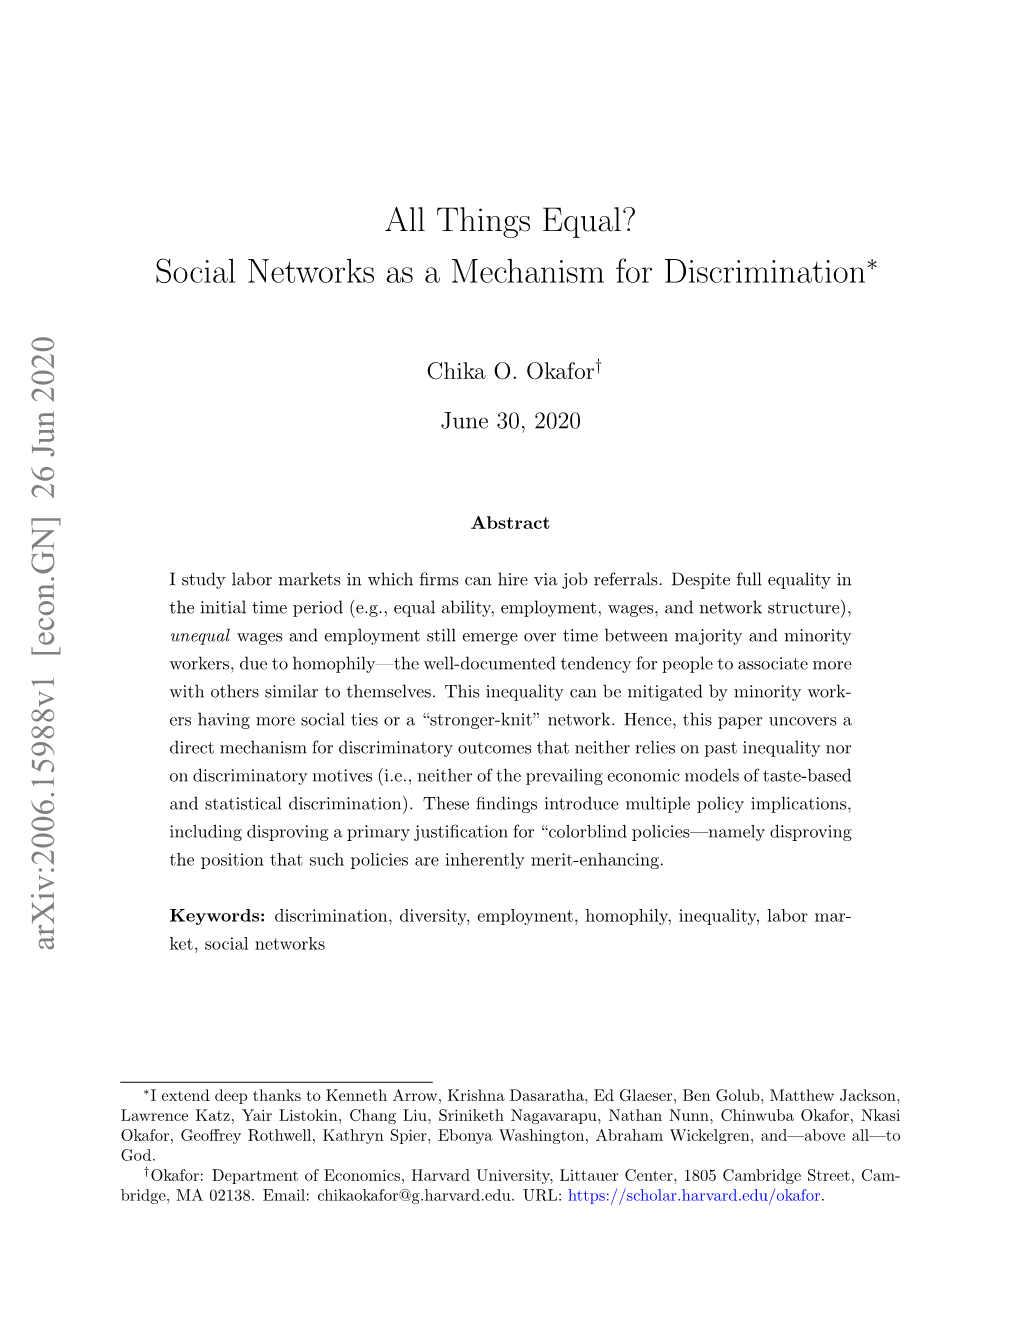 All Things Equal? Social Networks As a Mechanism for Discrimination Arxiv:2006.15988V1 [Econ.GN] 26 Jun 2020